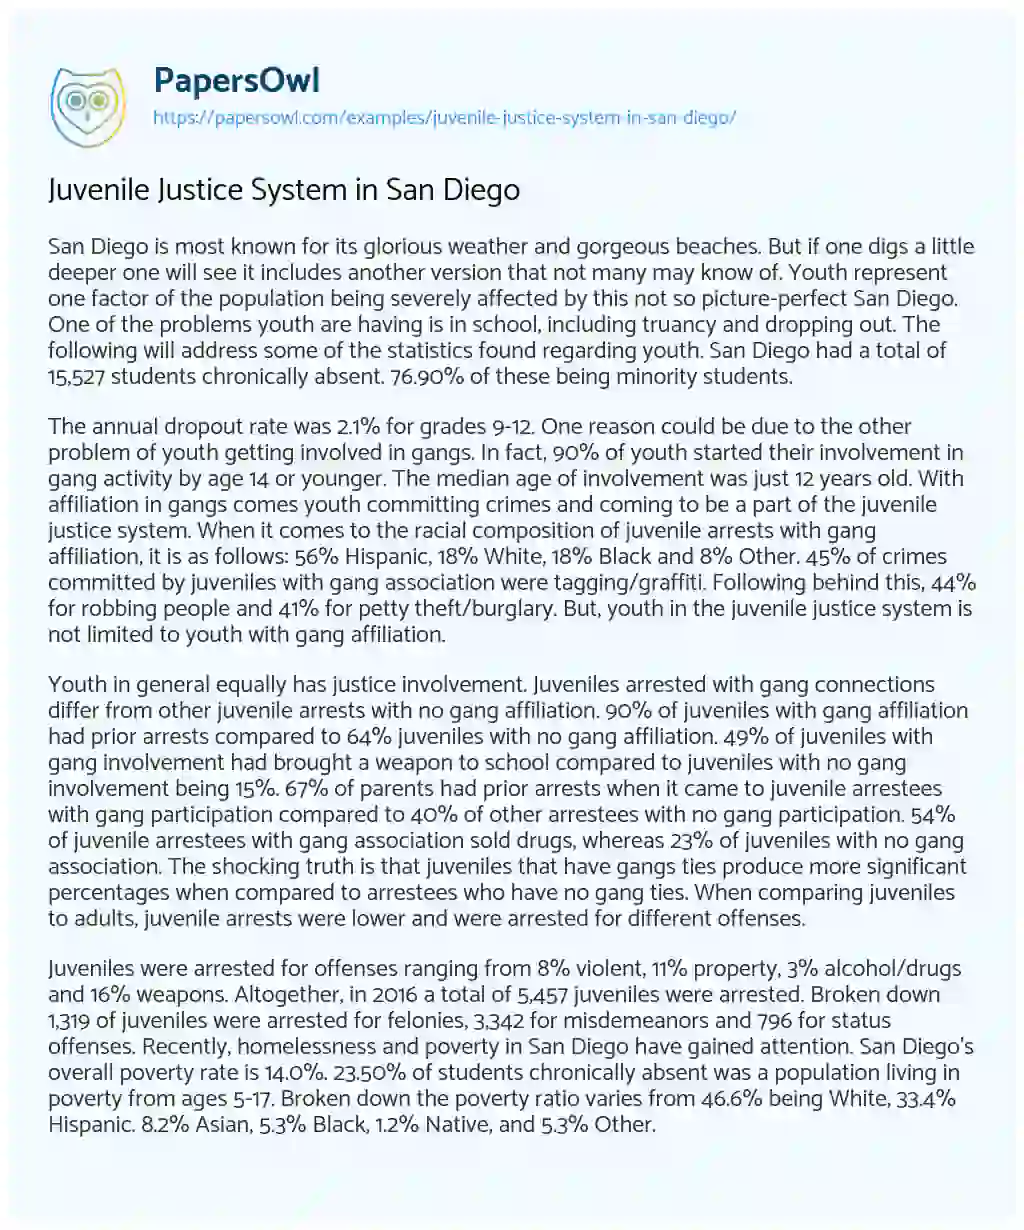 Essay on Juvenile Justice System in San Diego